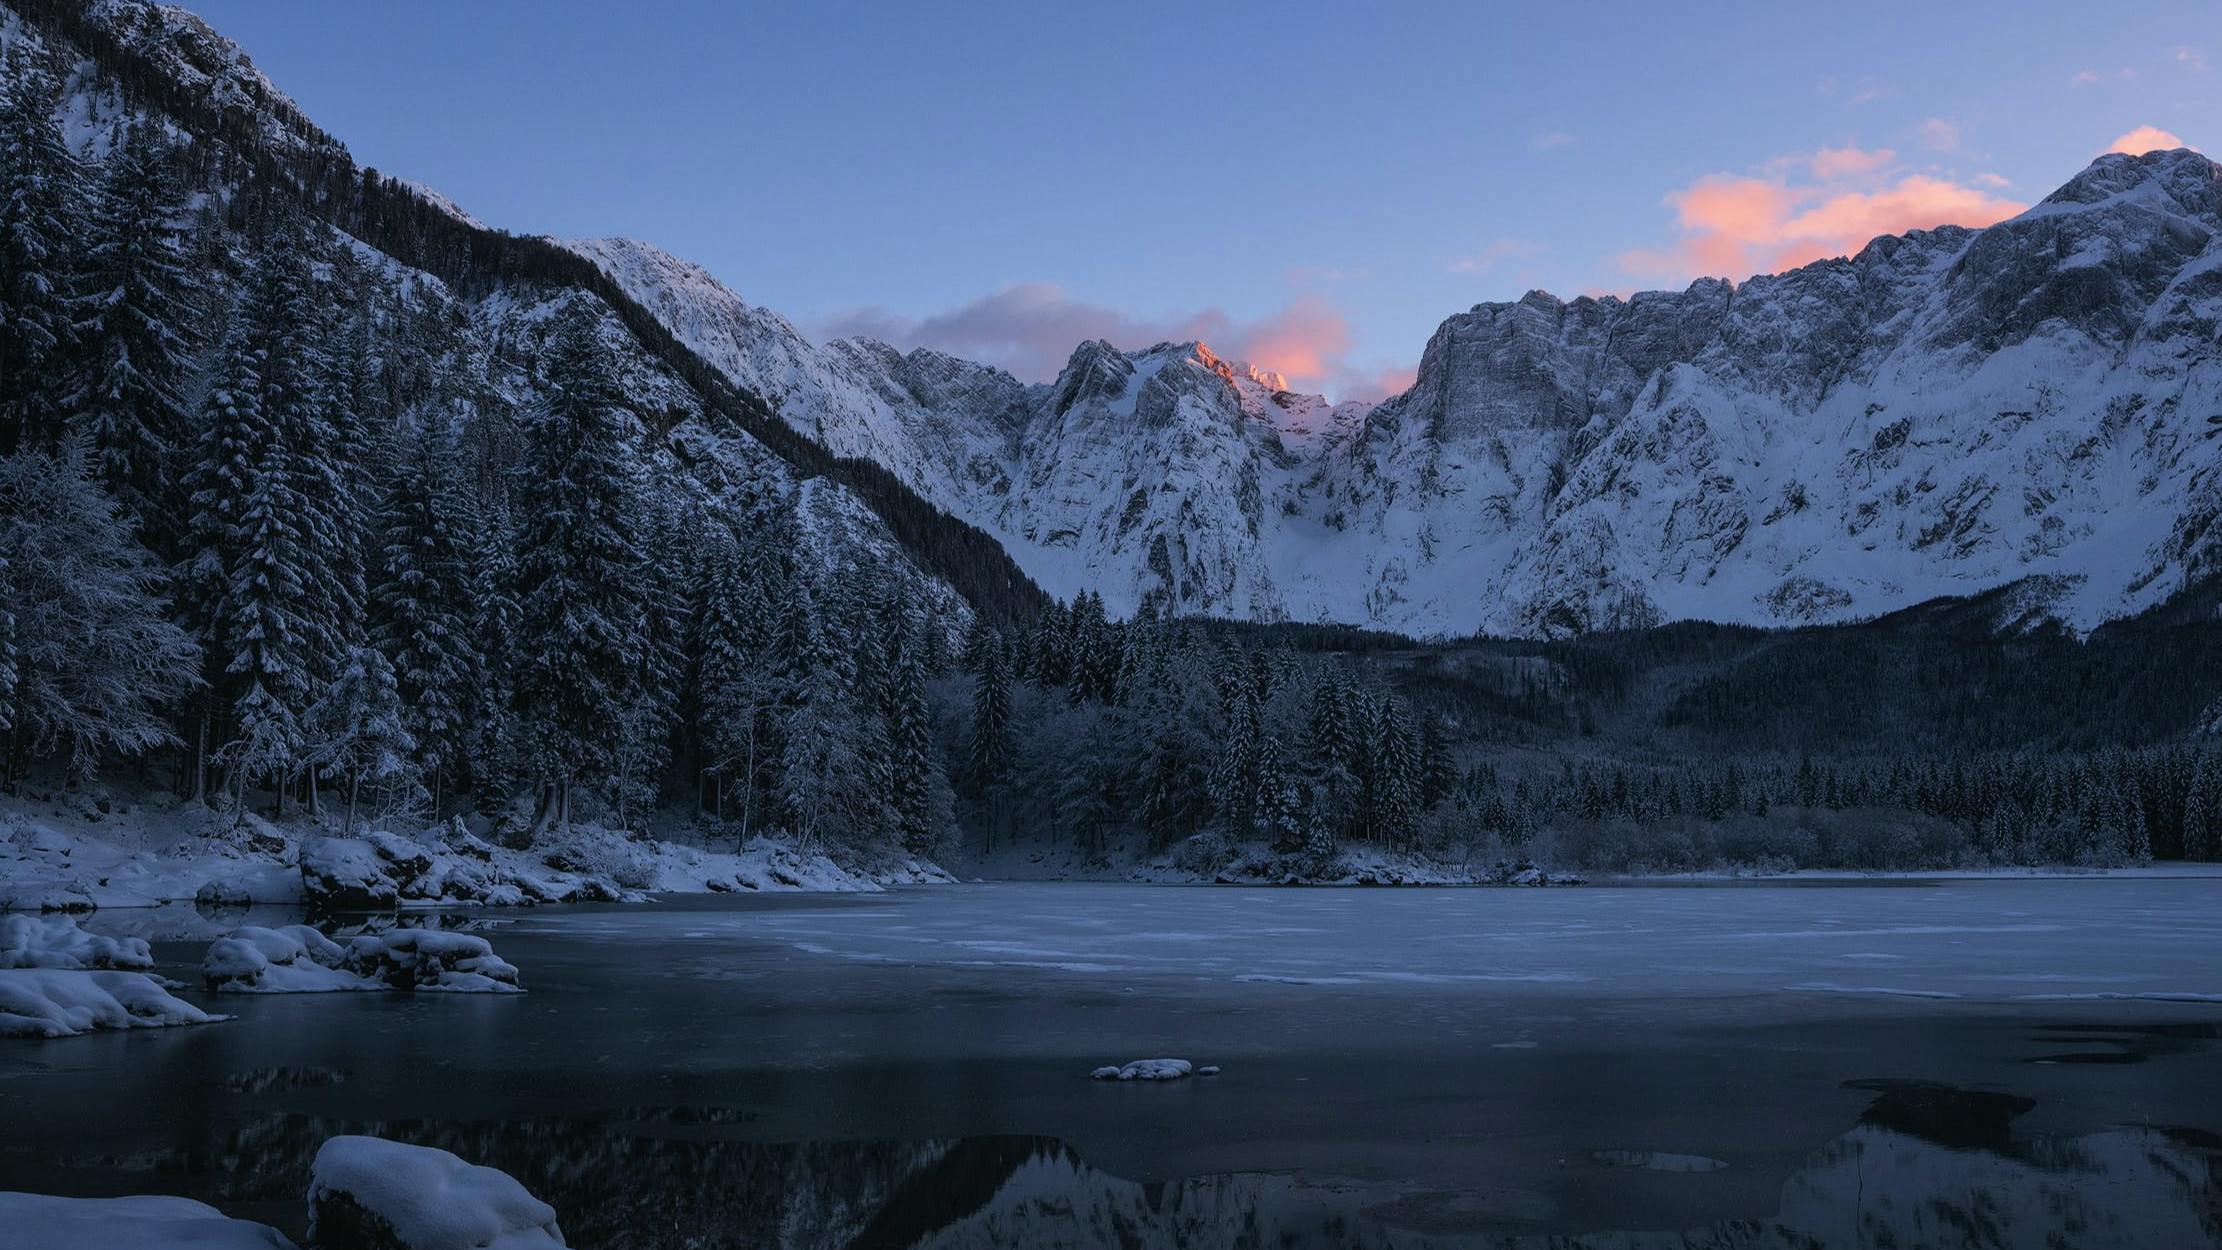 A sun rises over a snowy mountain and lake. 